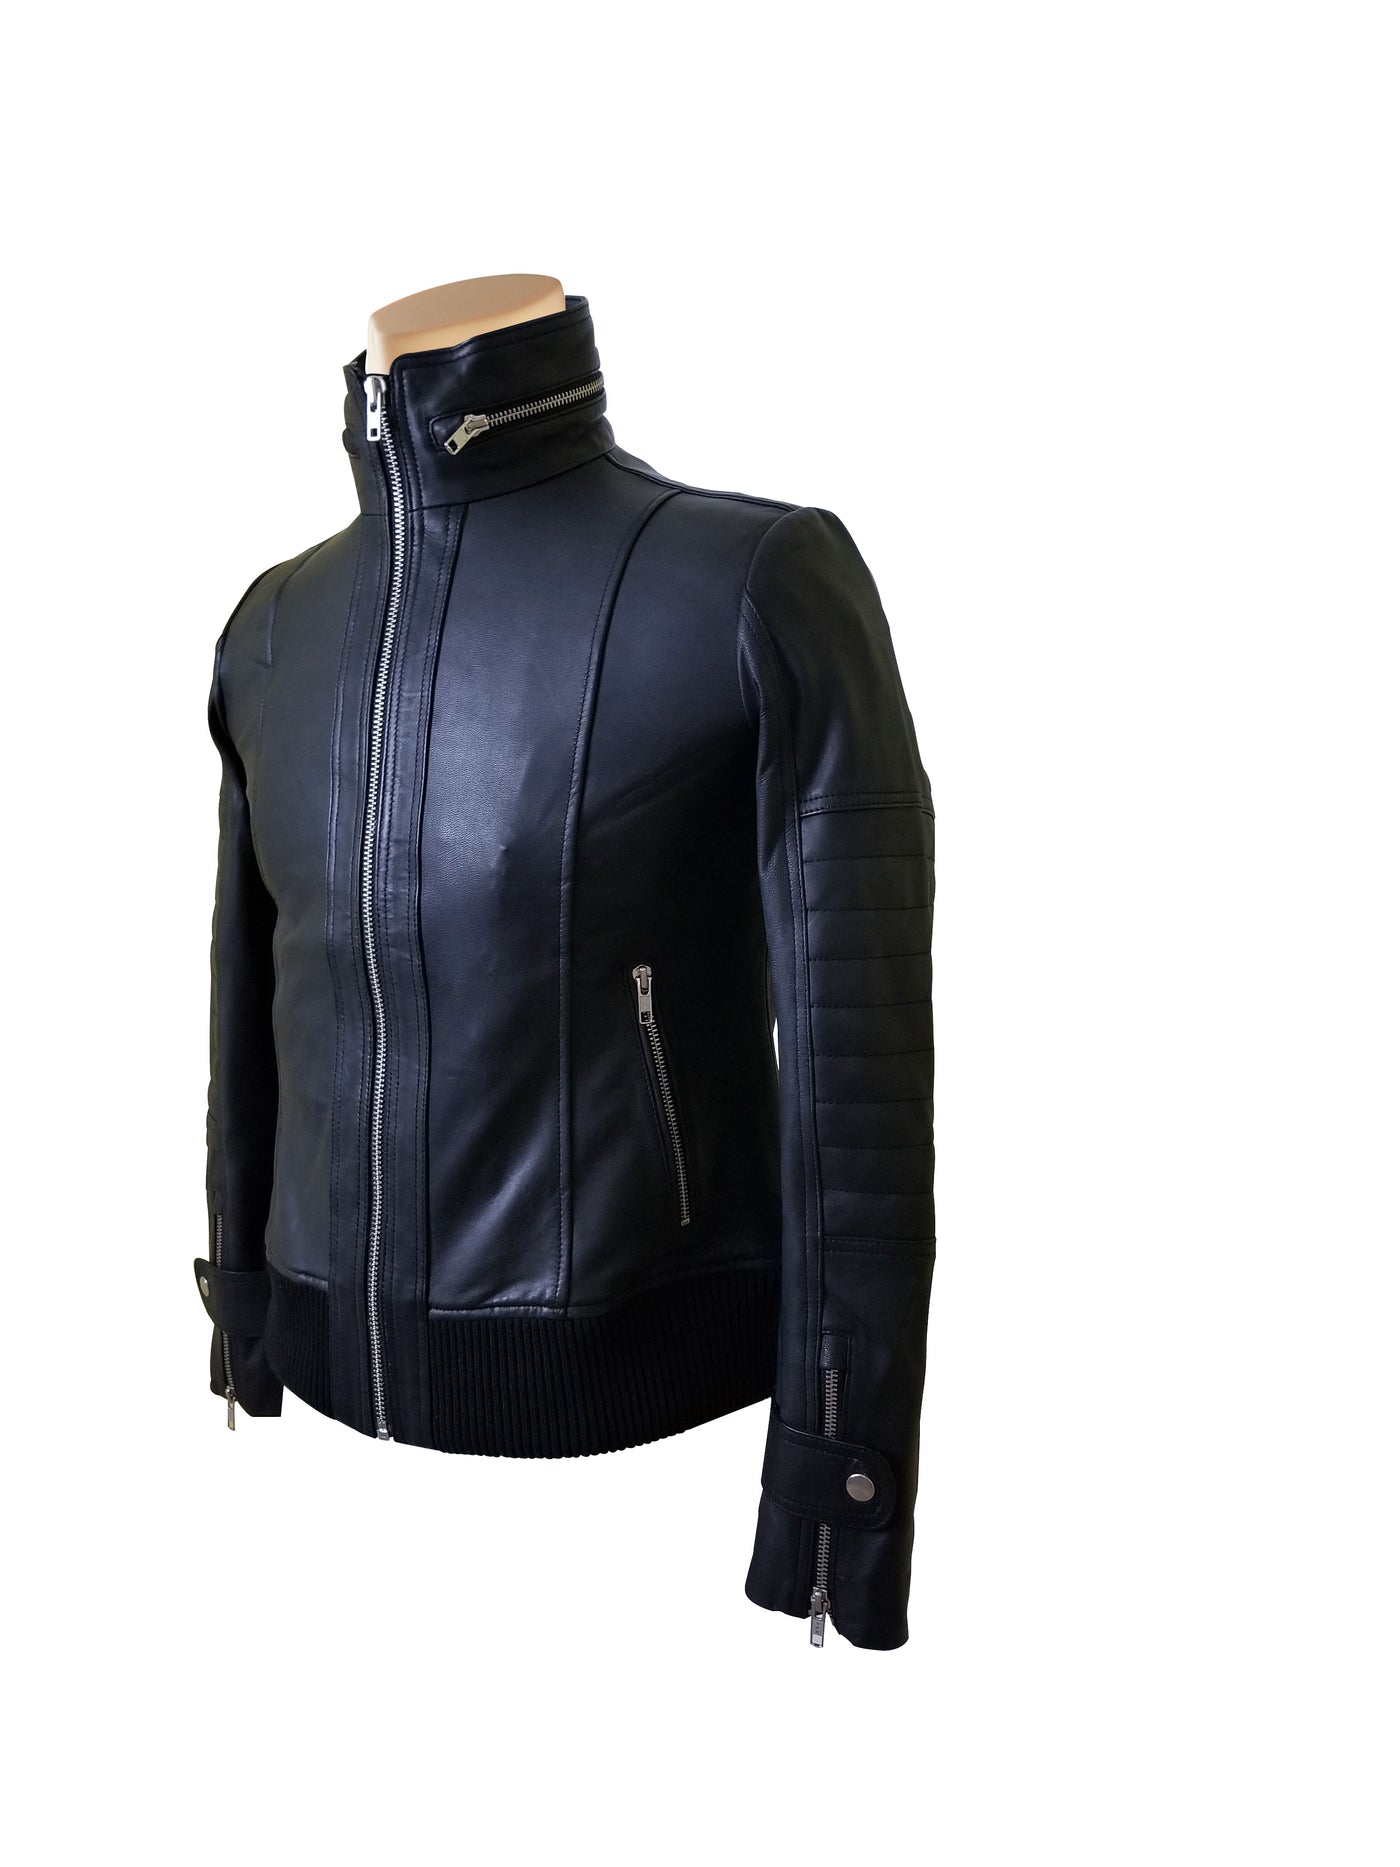 Straight Collar Olof's black leather jacket for women